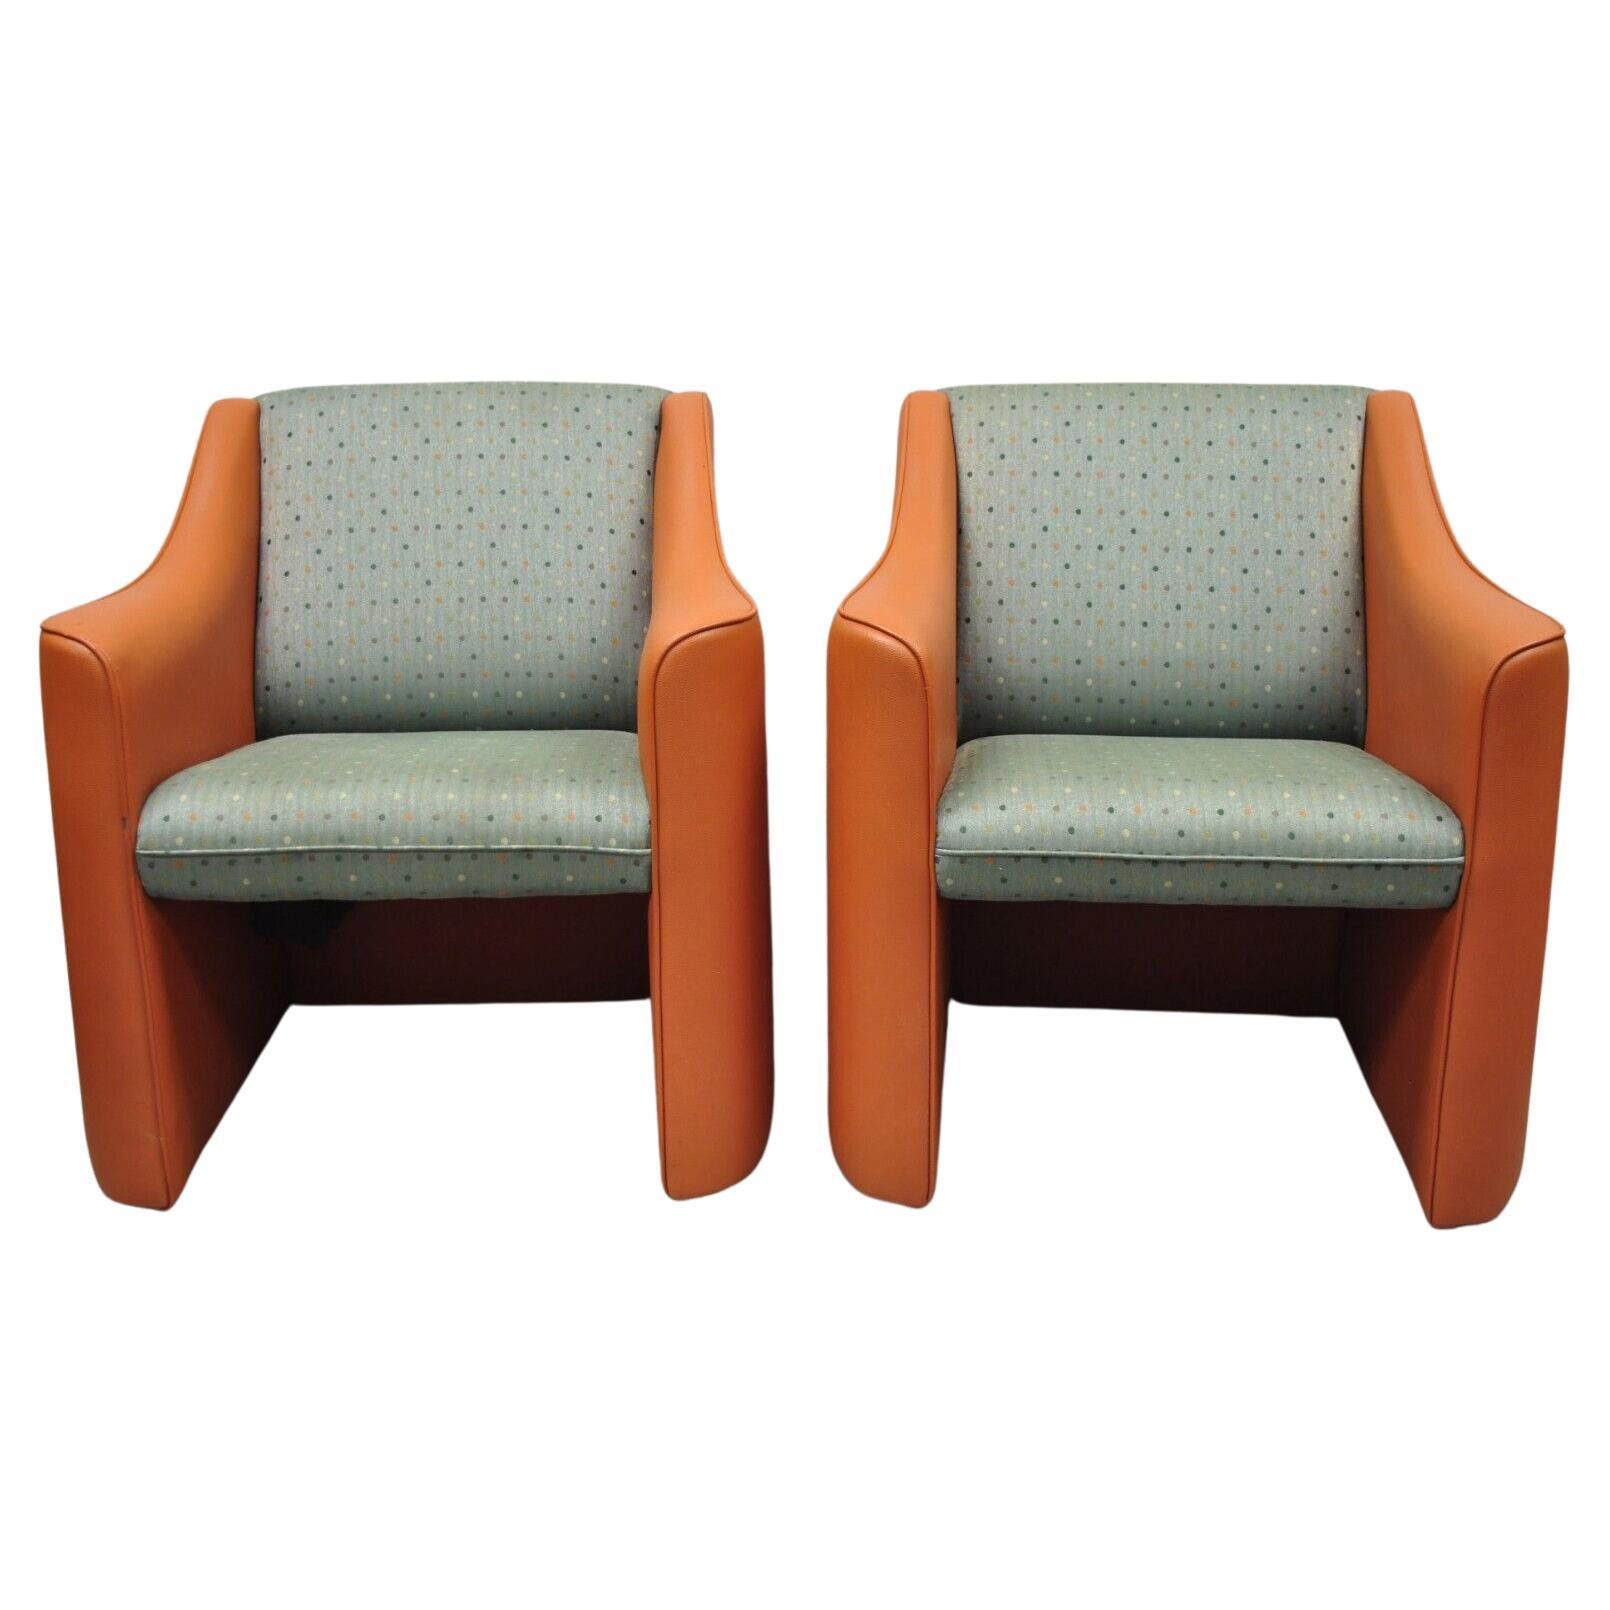 Modern Orange Upholstered Green Polka Dot Club Lounge Chairs - a Pair For Sale